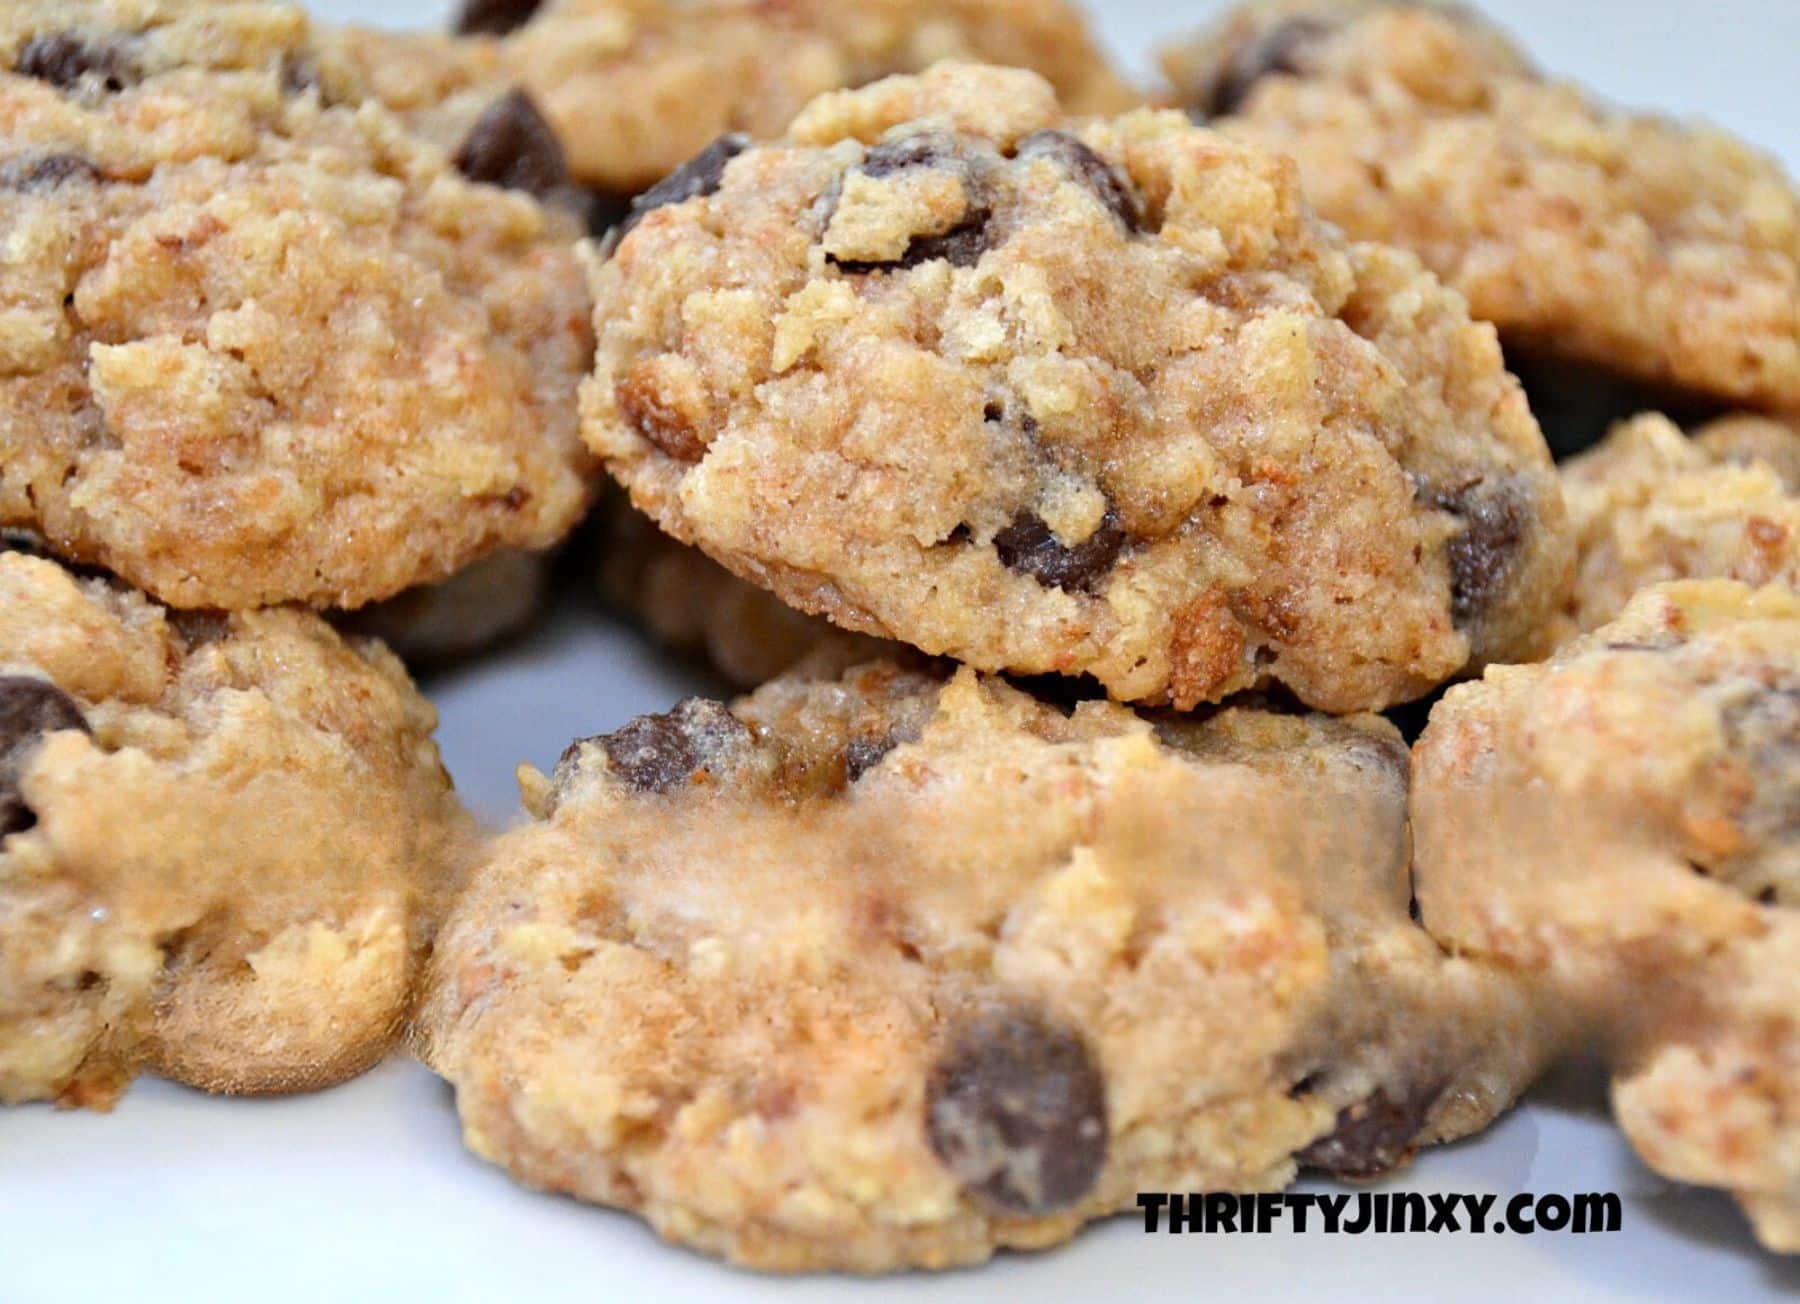 Bread Crumb Cookies with Chocolate Chips